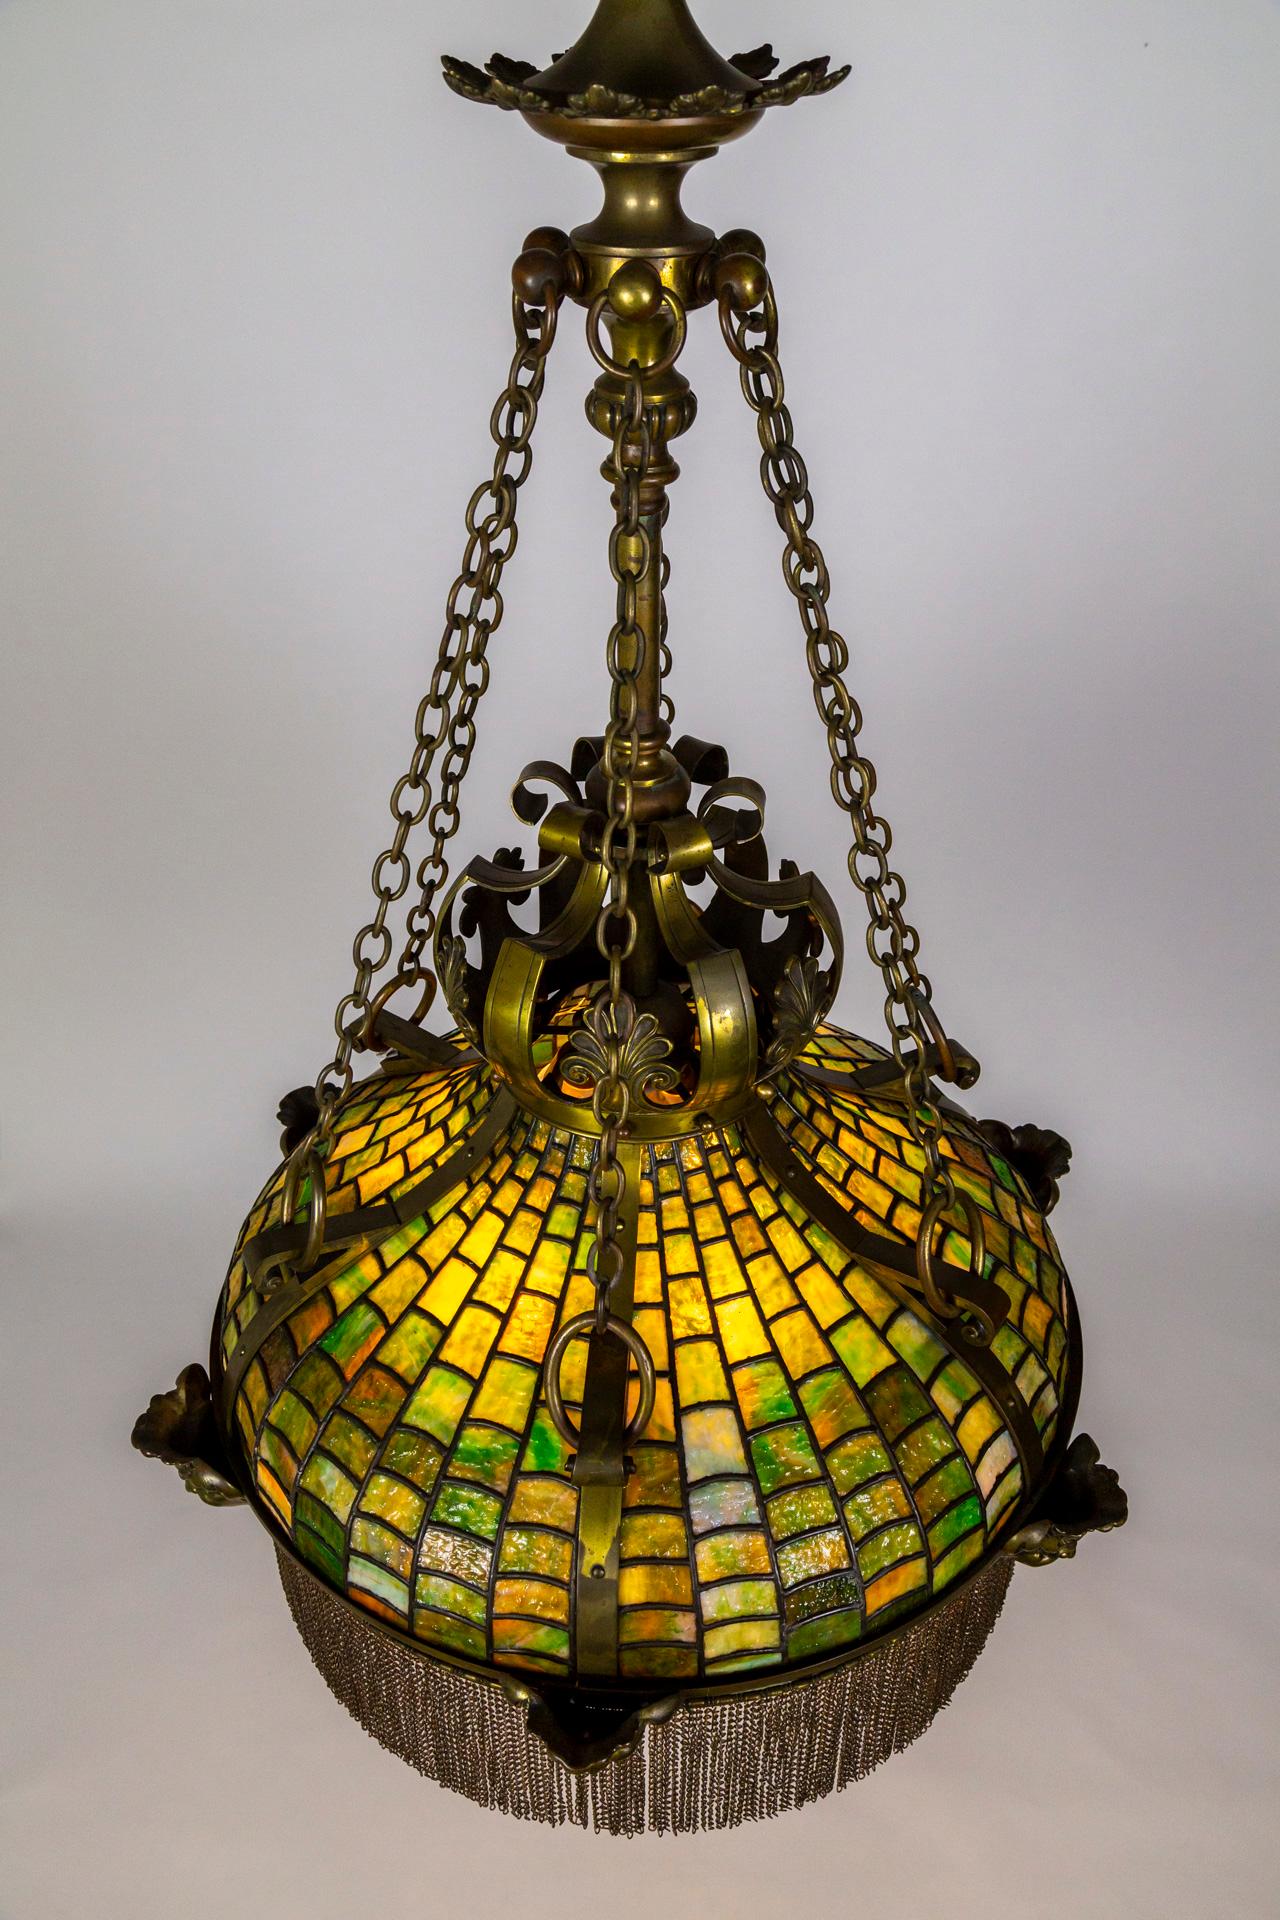 An expertly crafted, late 19th century, mosaic-style slag glass pendant light in a crowned, umbrella shape with subtle undulations; excellent lead work- the glass itself is textured and complex, in graduated sizes with unexpected variations in